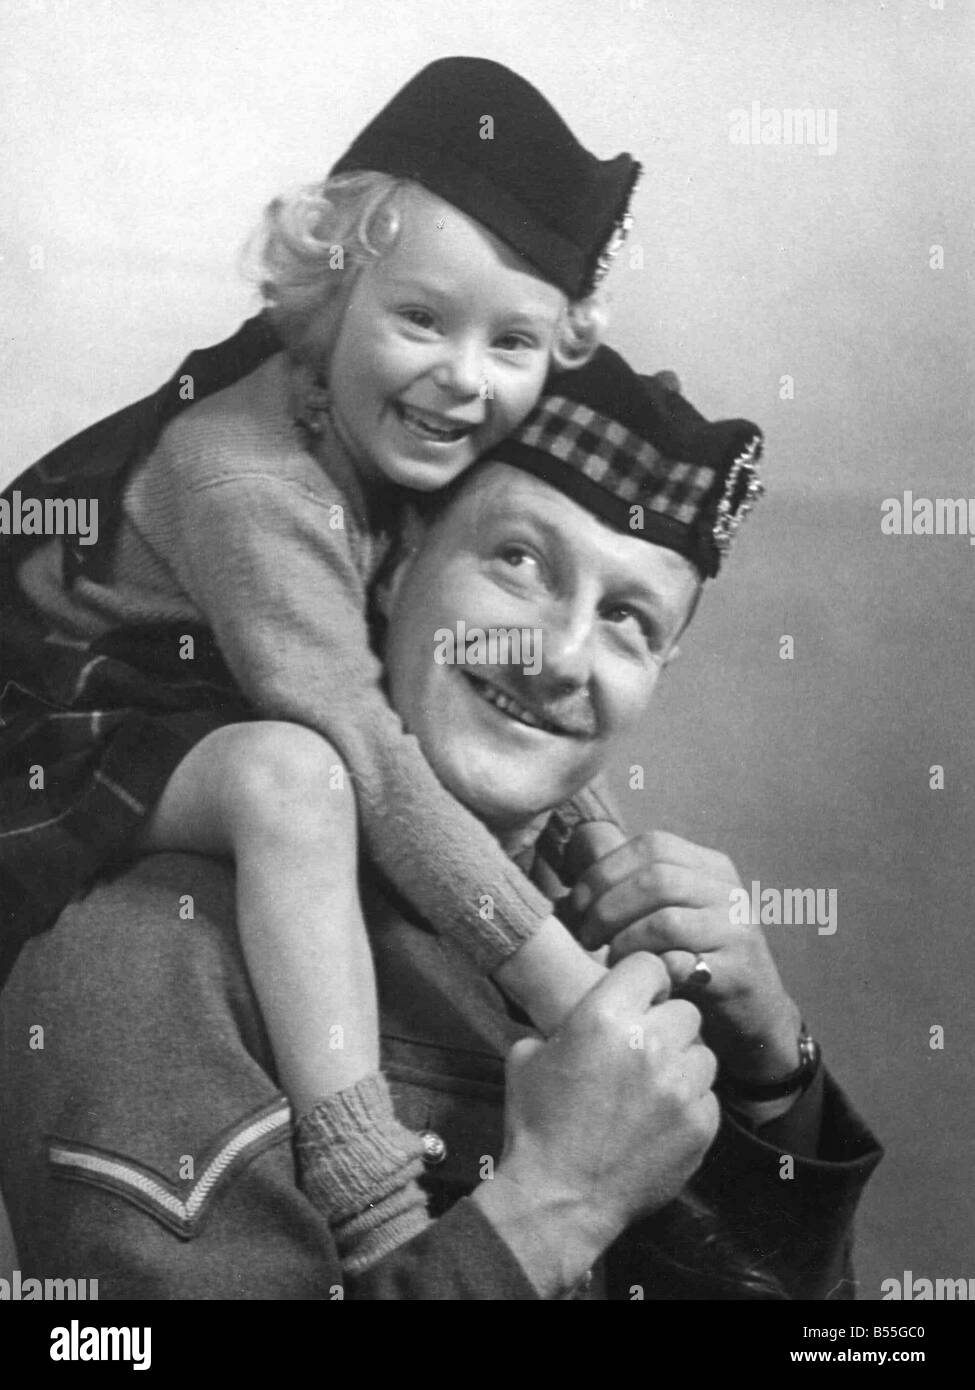 Young girl wearing a hat with tartan design sitting of her father's shoulder, wearing military uniform;Circa 1945;P044445 Stock Photo